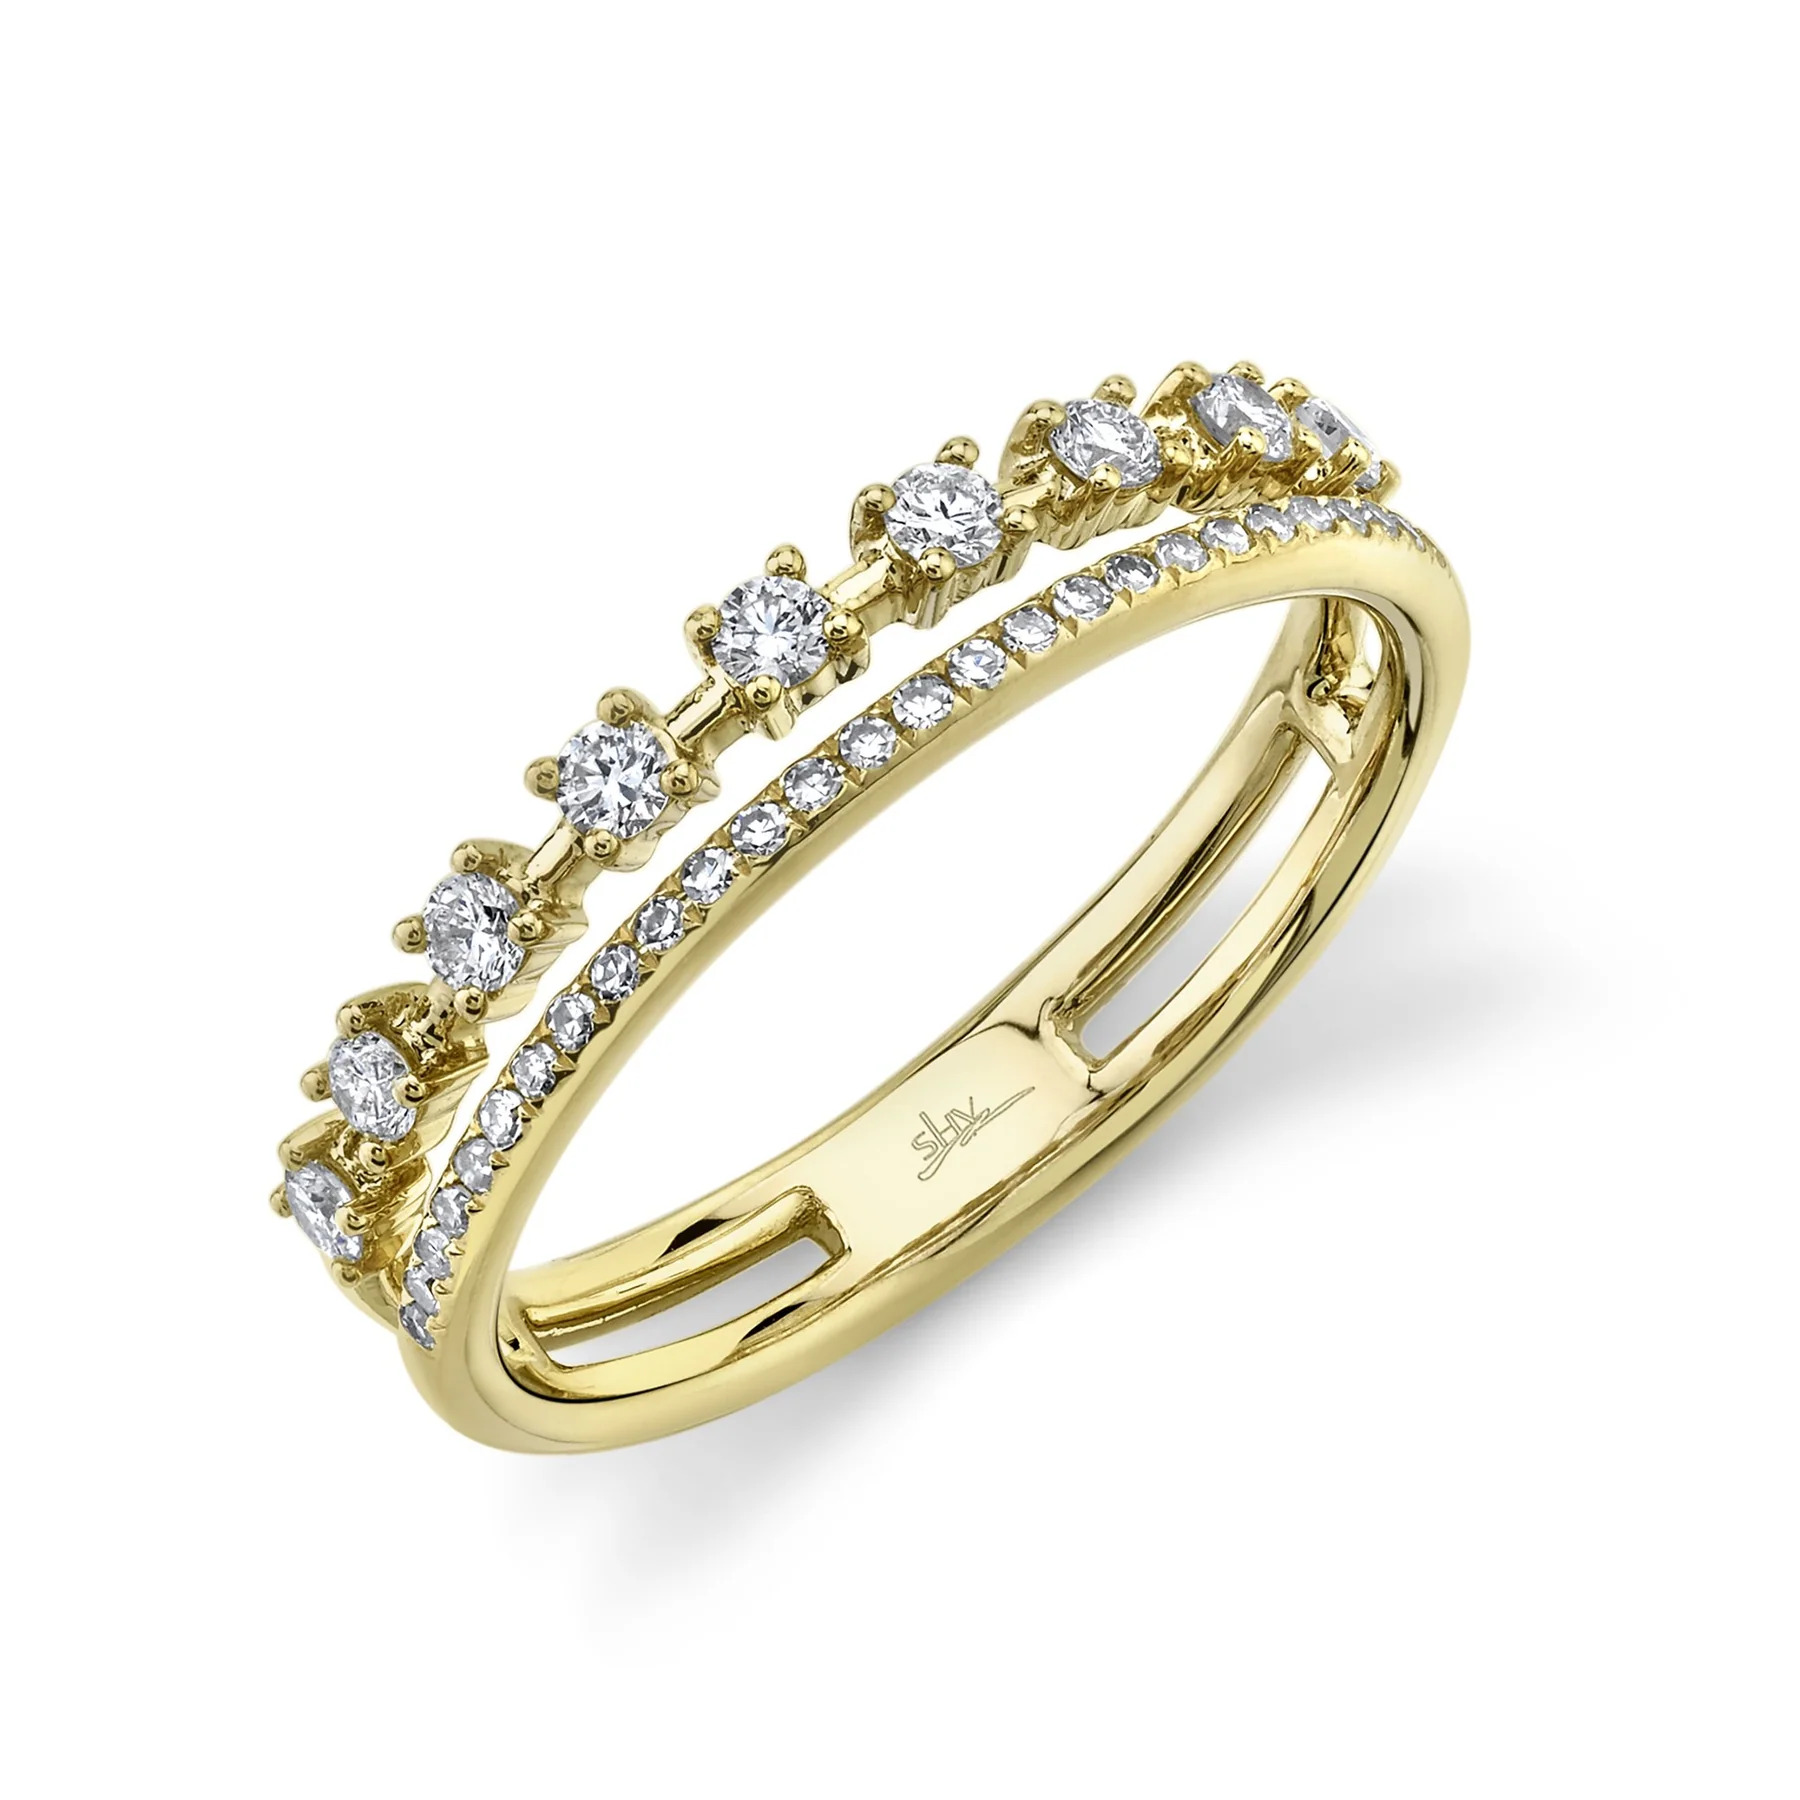 One yellow-gold ring is positioned slanted toward the camera. The ring showcases a double-row design, giving the illusion of two diamond bands. The first row features diamonds set in prongs, spaced out along the band. The second row of the ring is encrusted with diamonds.